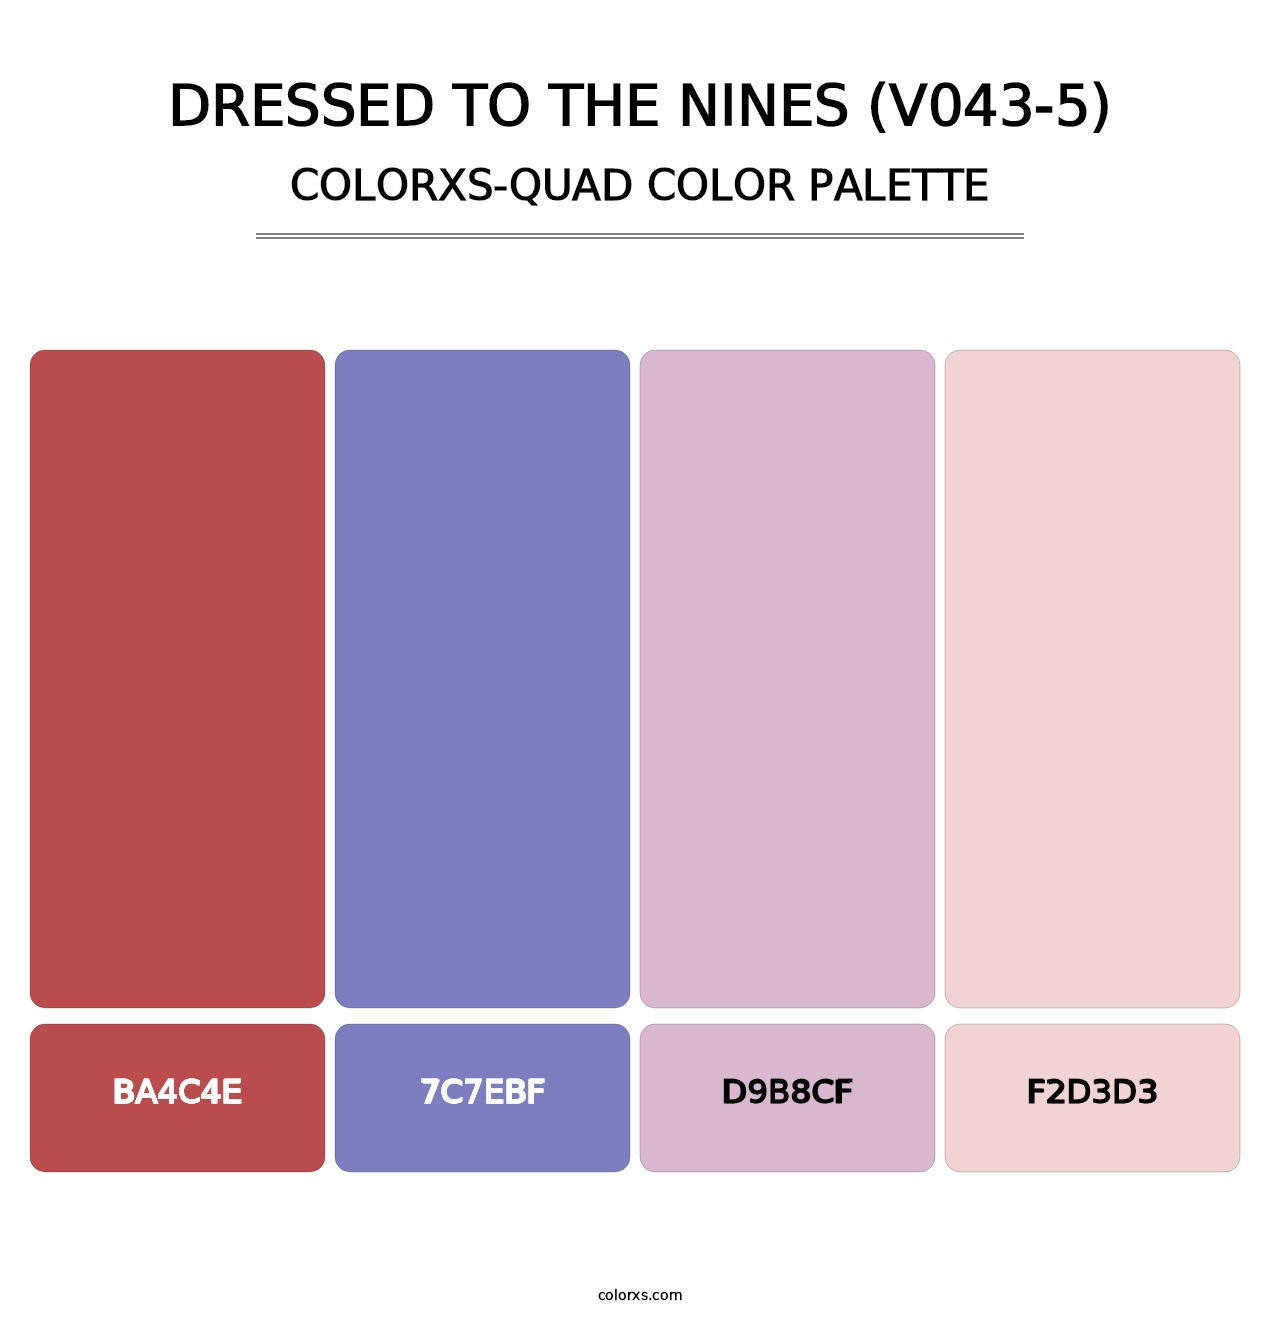 Dressed to the Nines (V043-5) - Colorxs Quad Palette